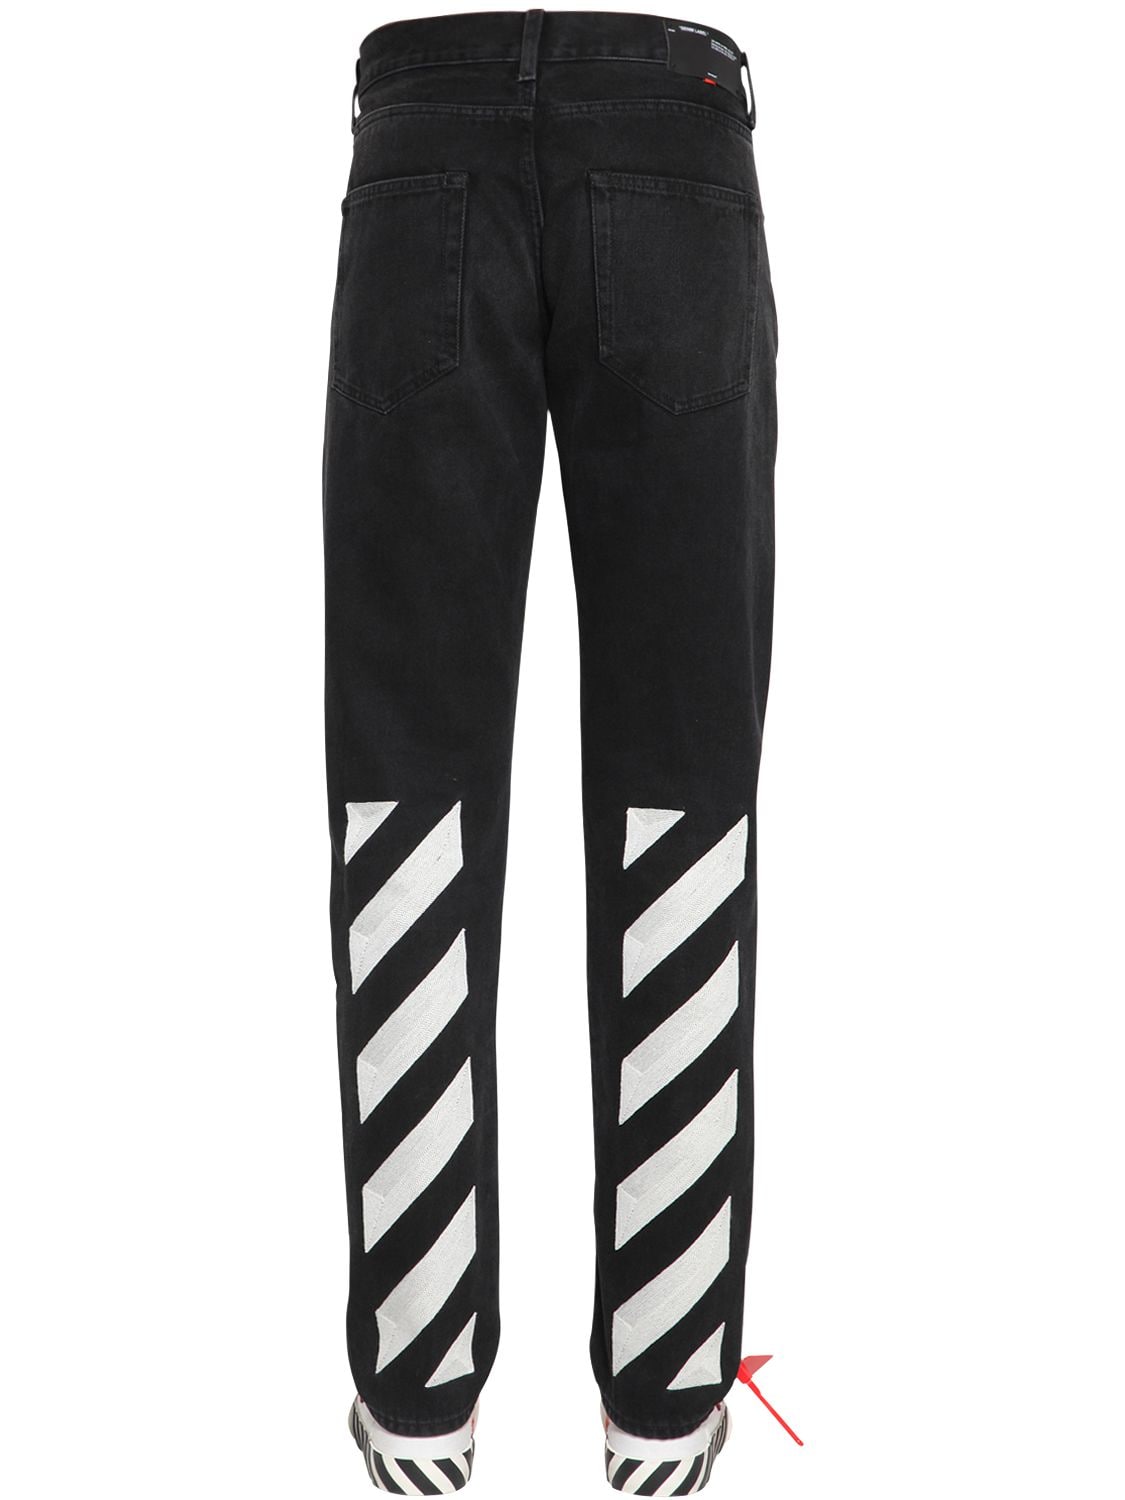 off white jeans with stripes